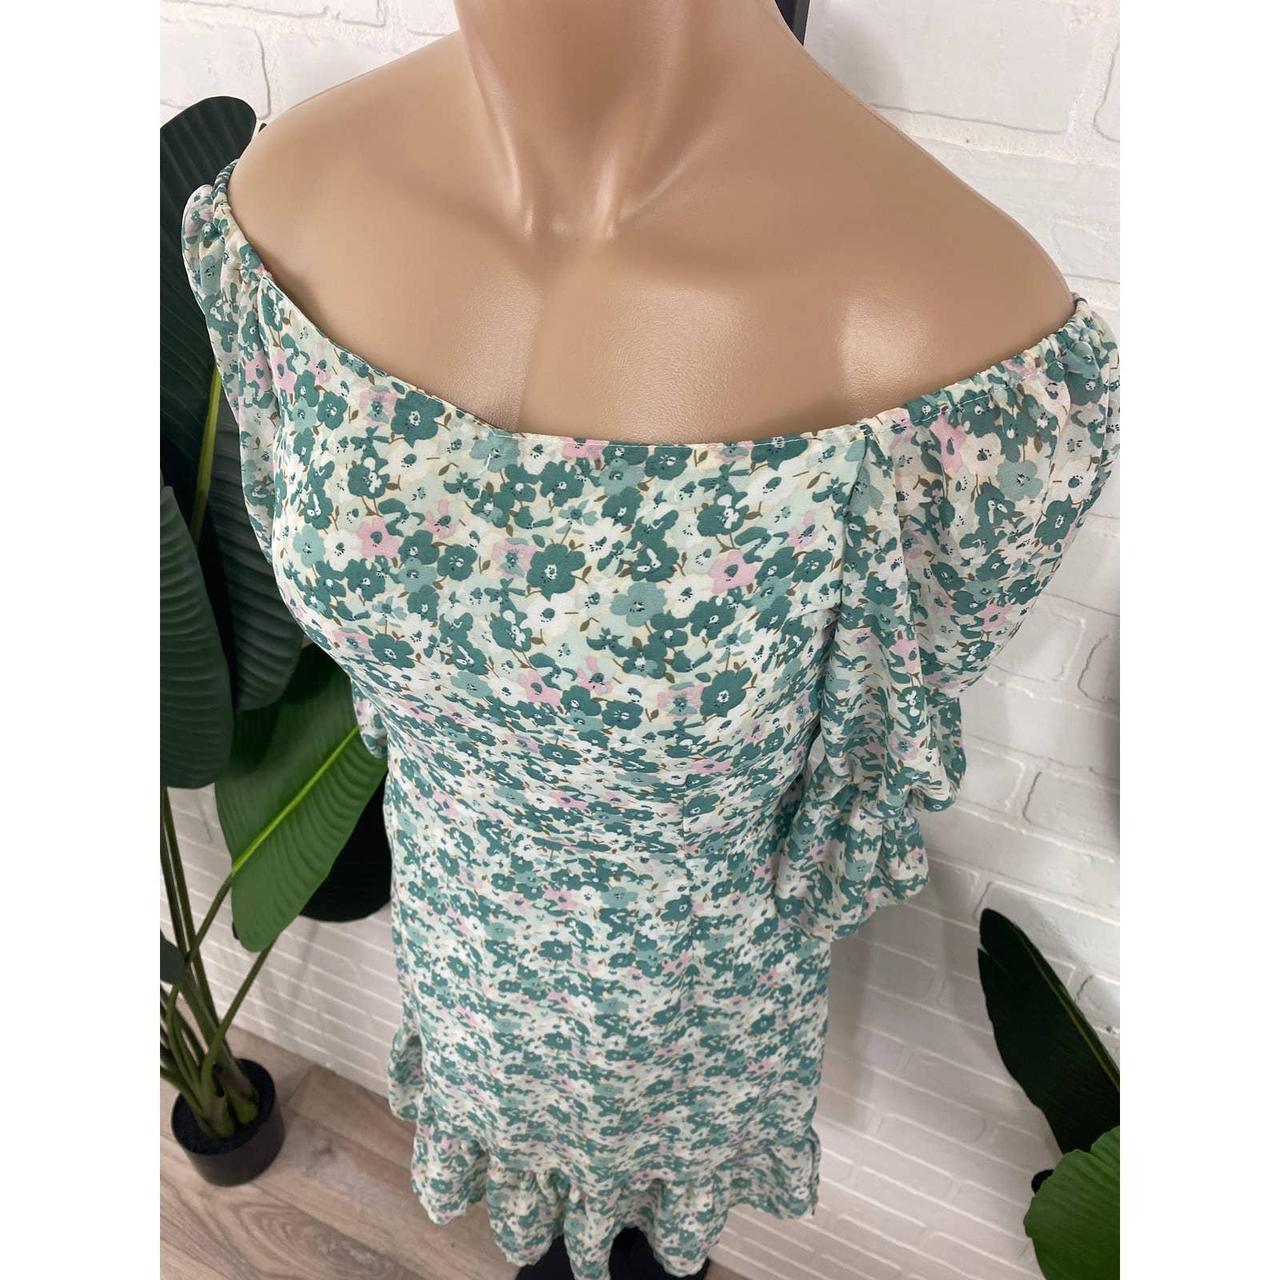 Product Image 2 - No Paypal

Floral green sundress. Can